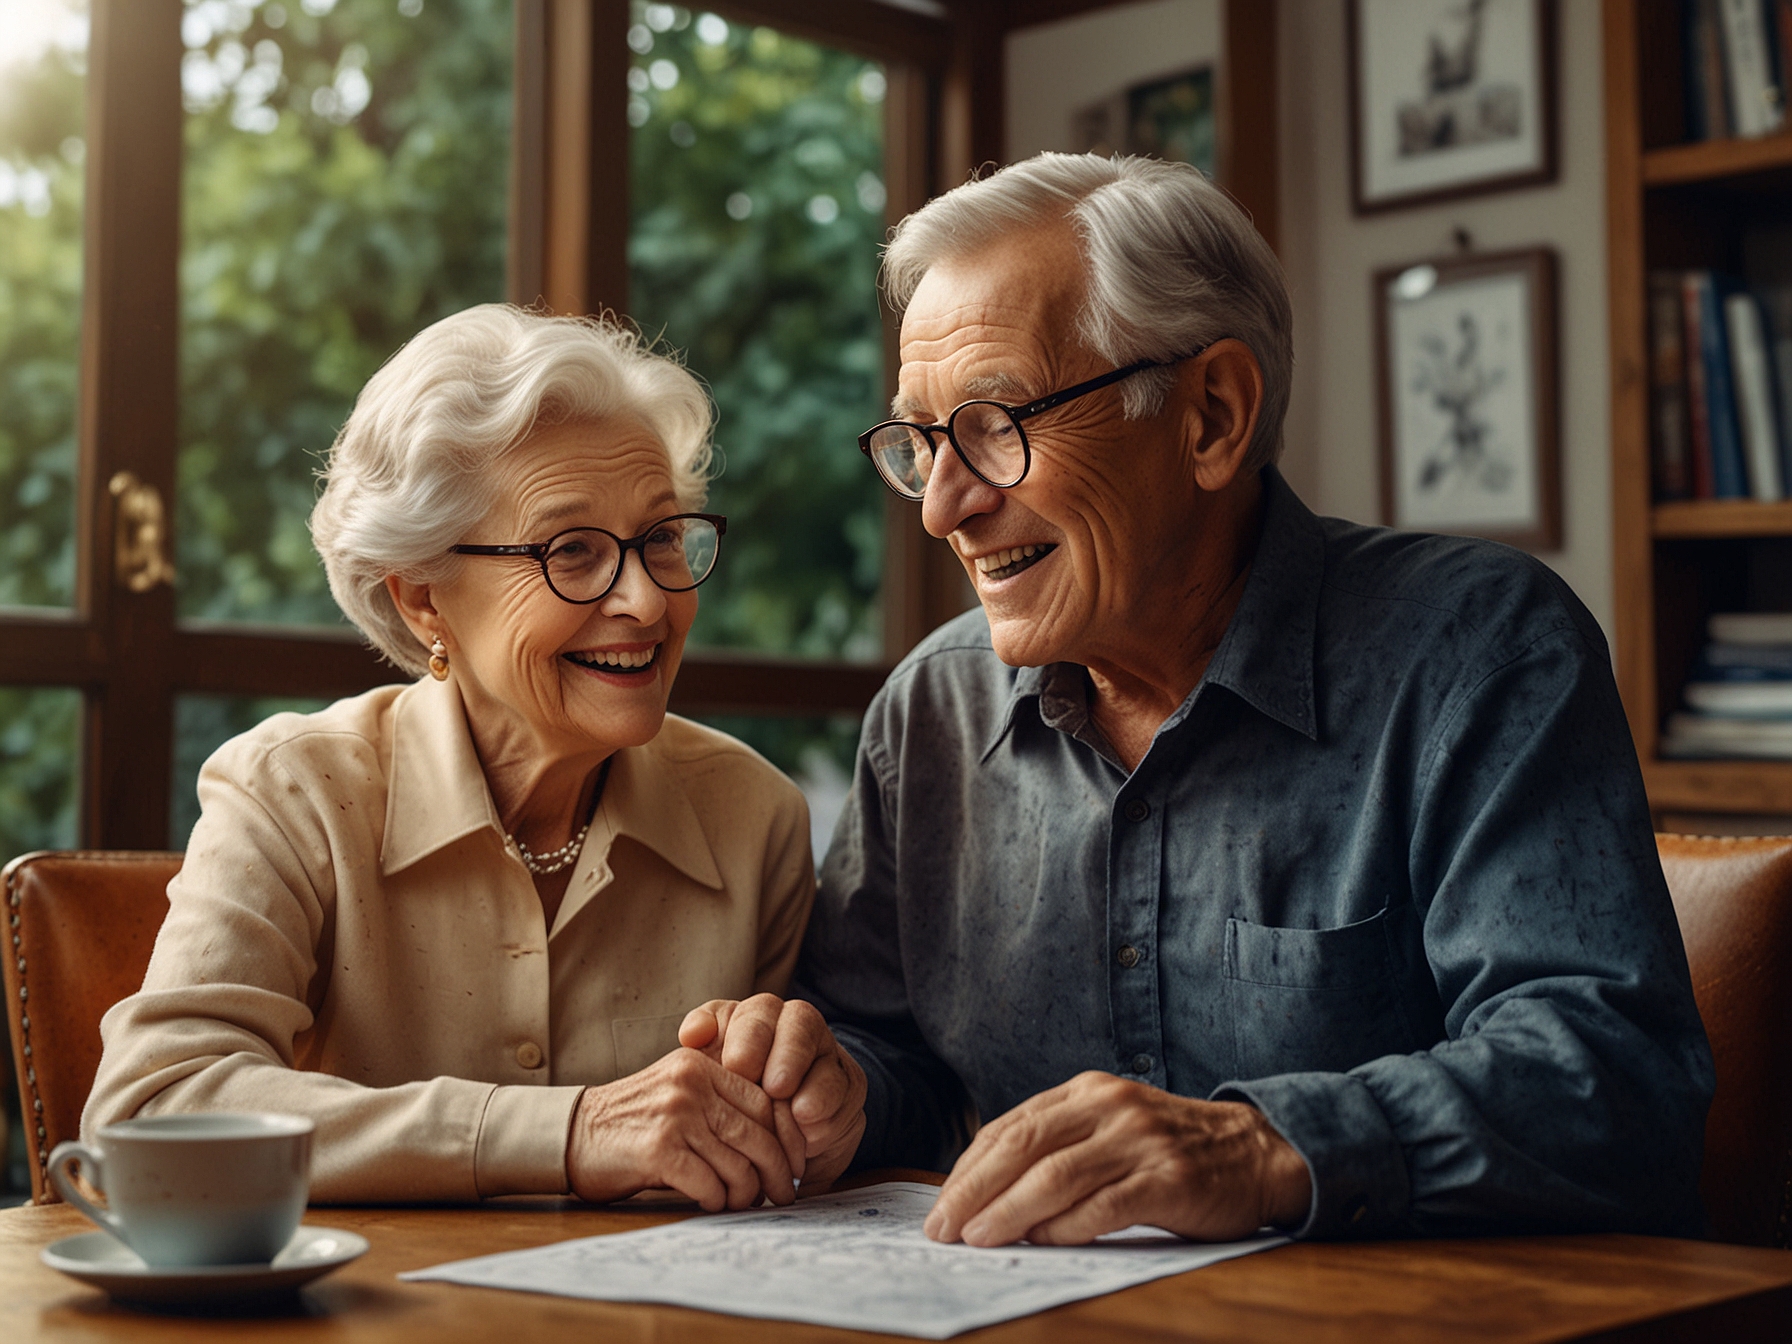 An elderly couple happily reviewing their retirement plans. Illustration of people extending their careers and delaying Social Security benefits for increased financial security in retirement.